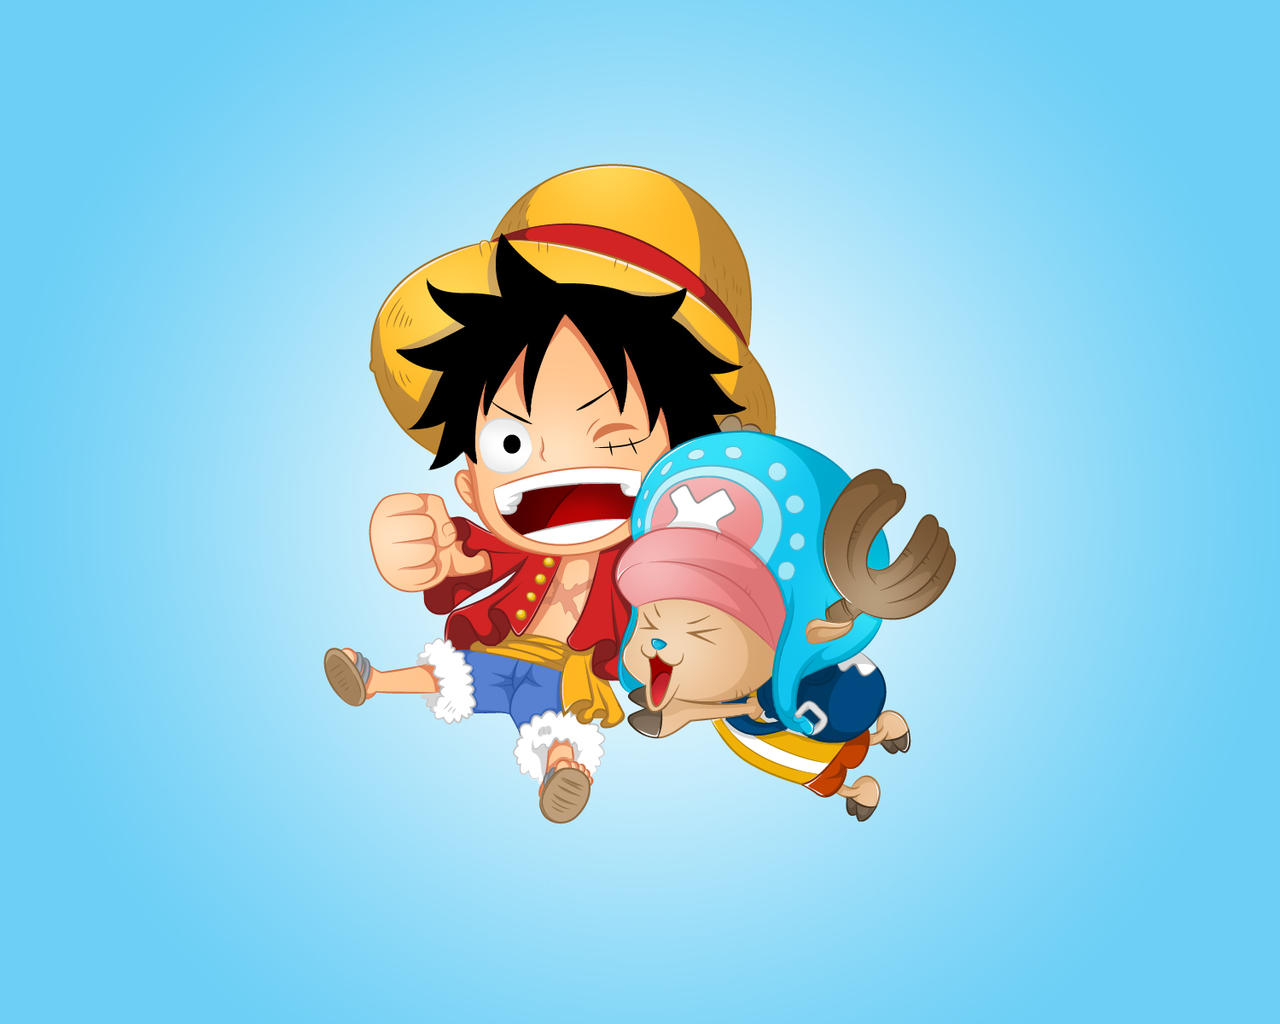 Chibi Luffy and Chopper by aiharachan on DeviantArt